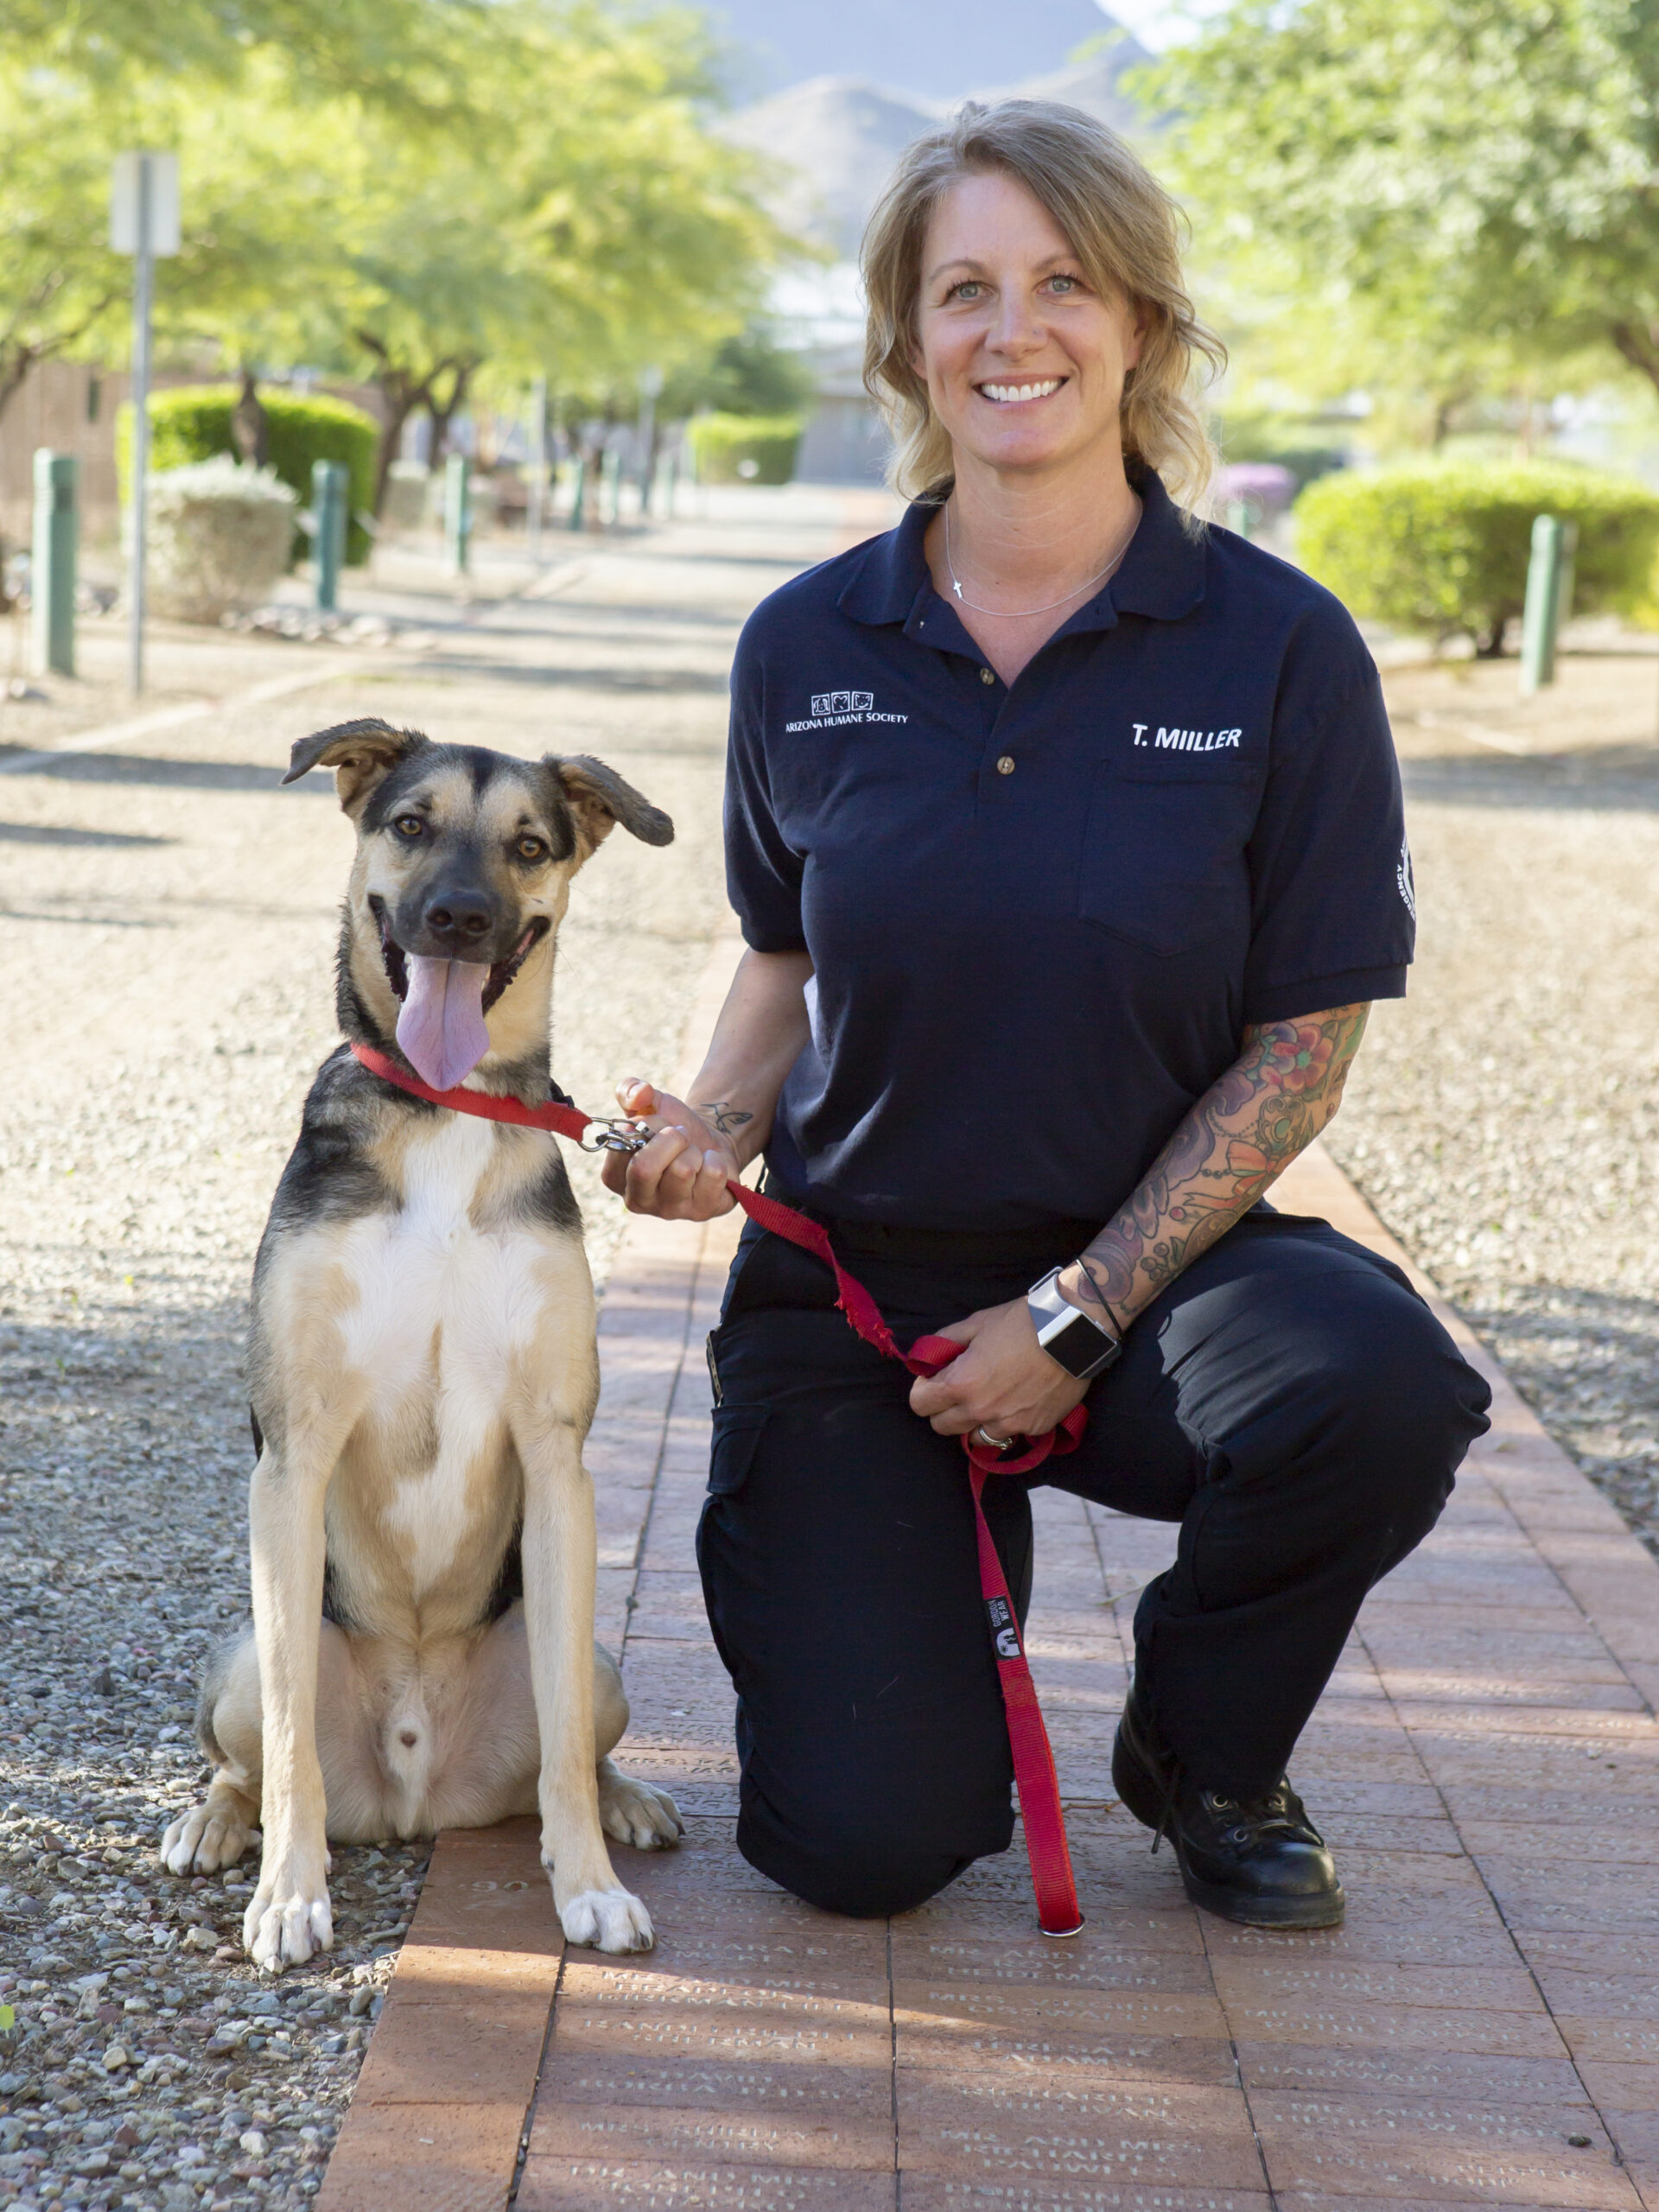 Tracey Miller from the Arizona Humane Society.